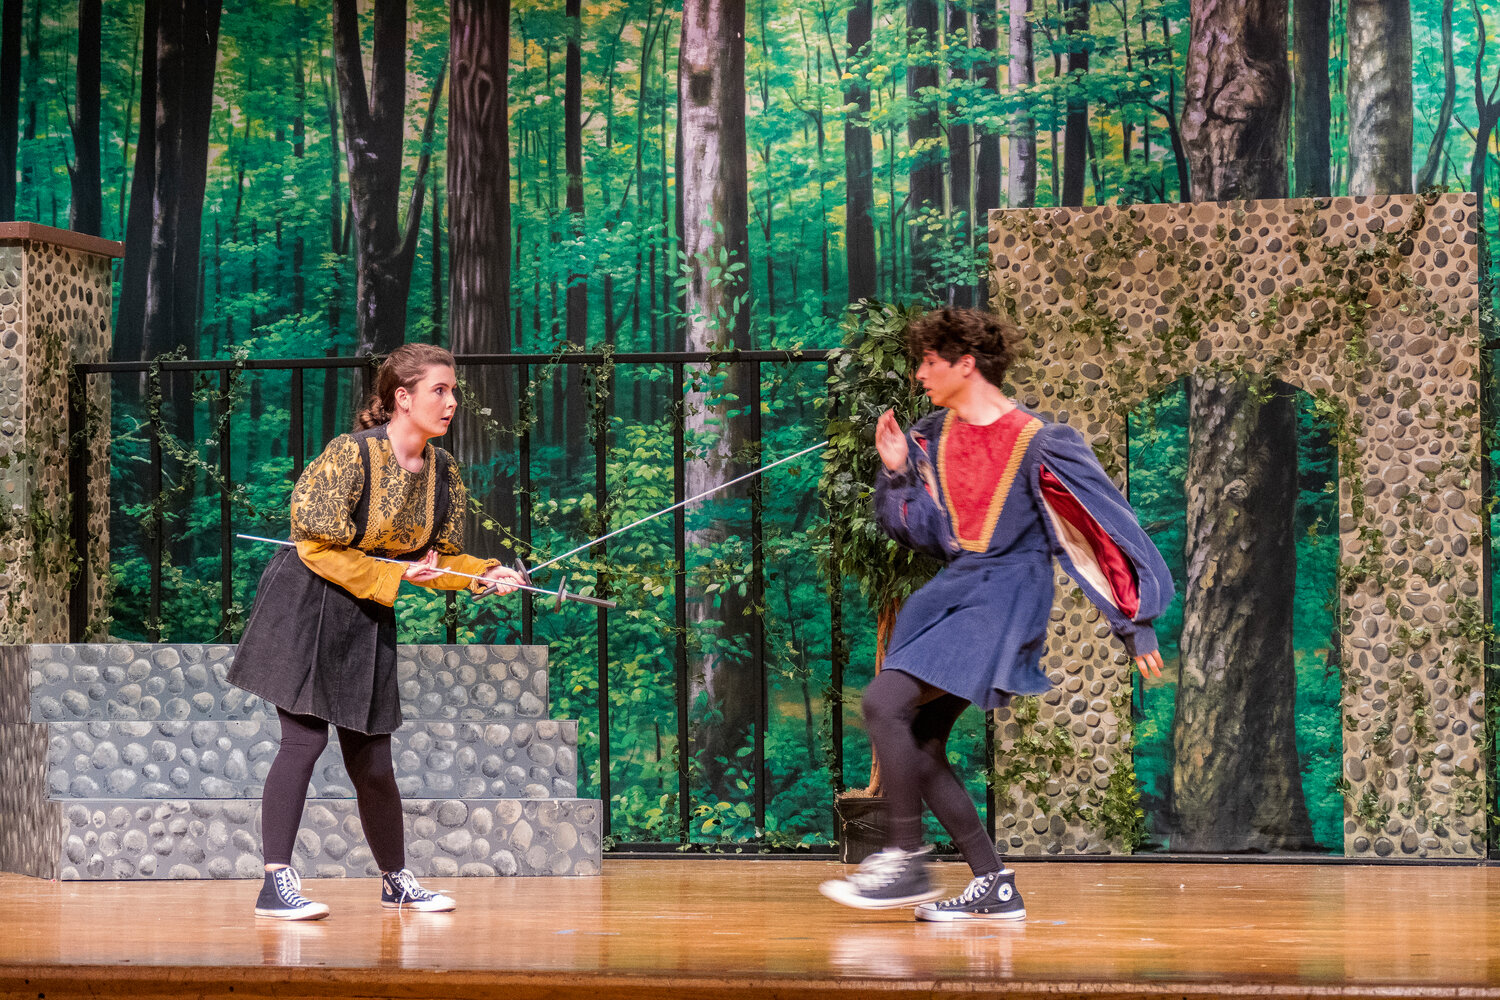 The comedic Shakespeare show had it all, from action to laughs.